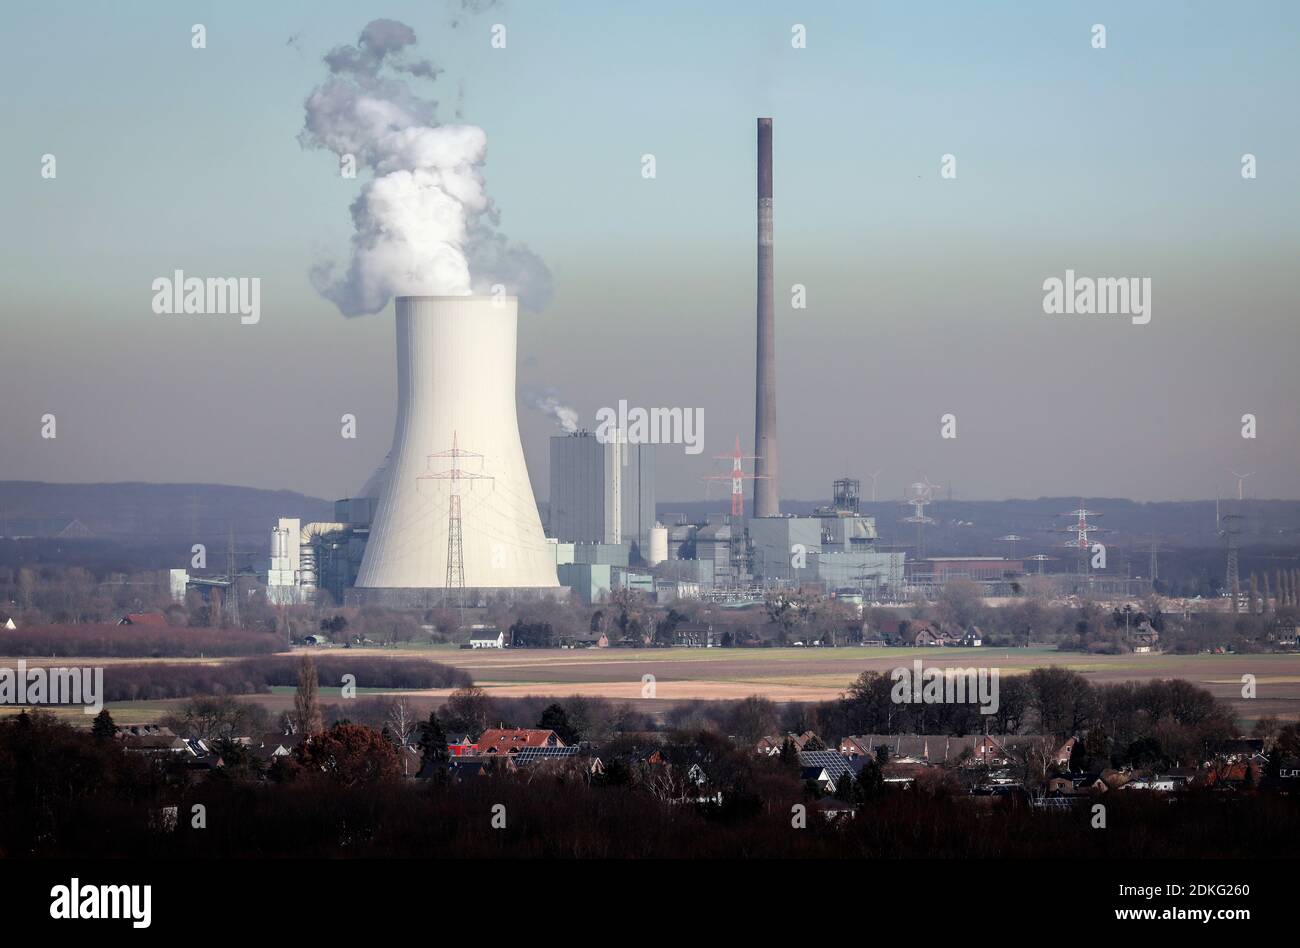 Duisburg, Ruhr area, North Rhine-Westphalia, Germany - STEAG Heizkraftwerk Walsum, the Walsum power plant is a hard coal-fired power plant in Duisburg-Walsum and is located on the site of the former Walsum colliery directly on the Rhine. Stock Photo